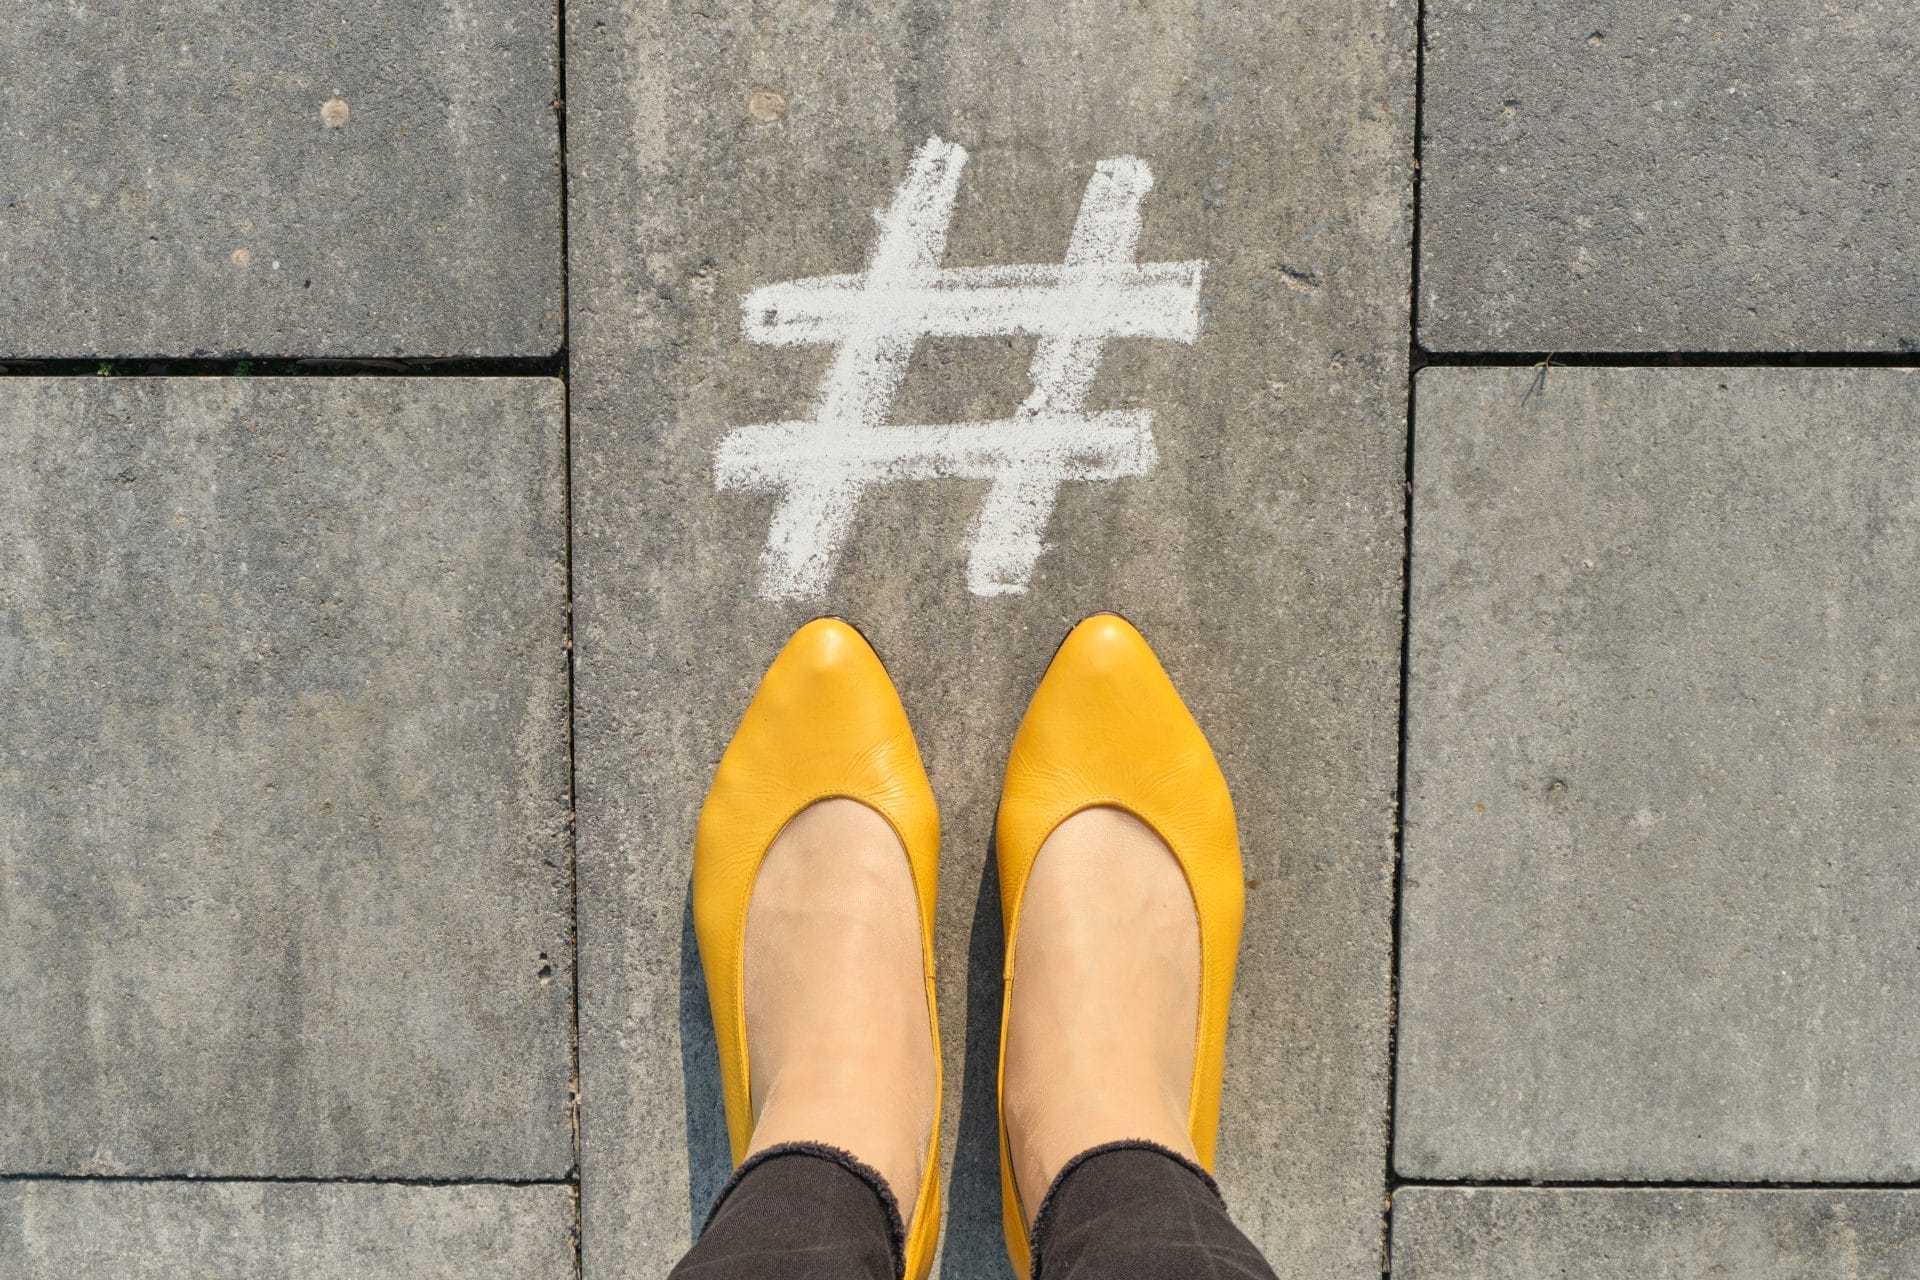 hashtag symbol on gray sidewalk with woman legs top view